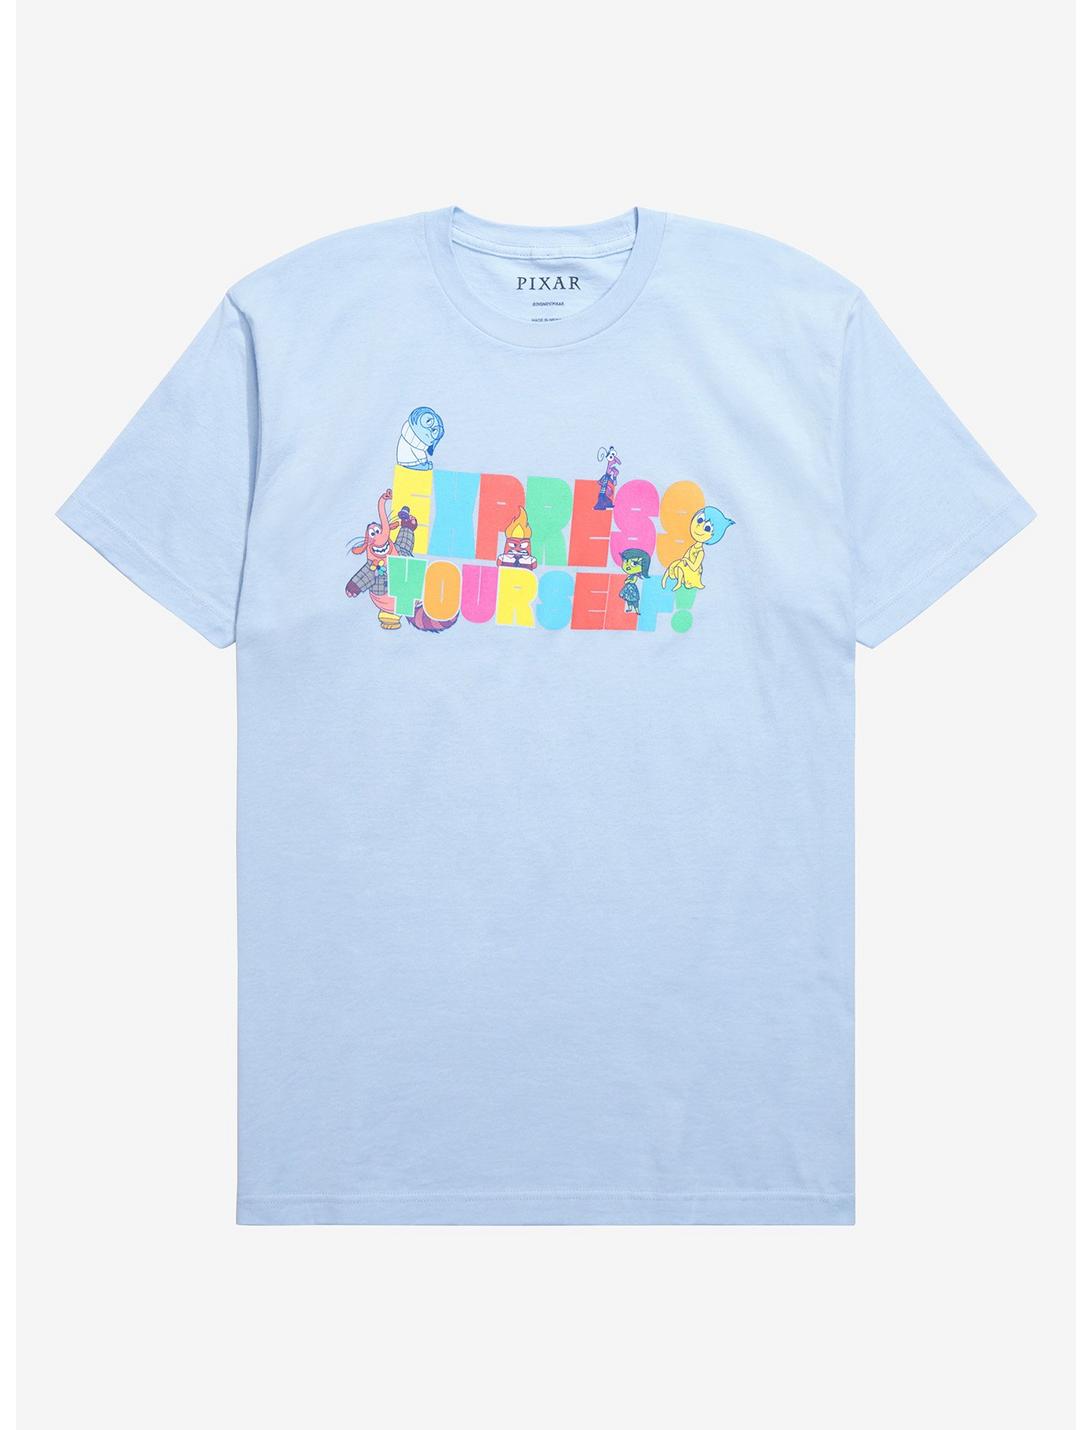 Disney Pixar Inside Out Express Yourself T-Shirt - BoxLunch Exclusive, LIGHT BLUE, hi-res